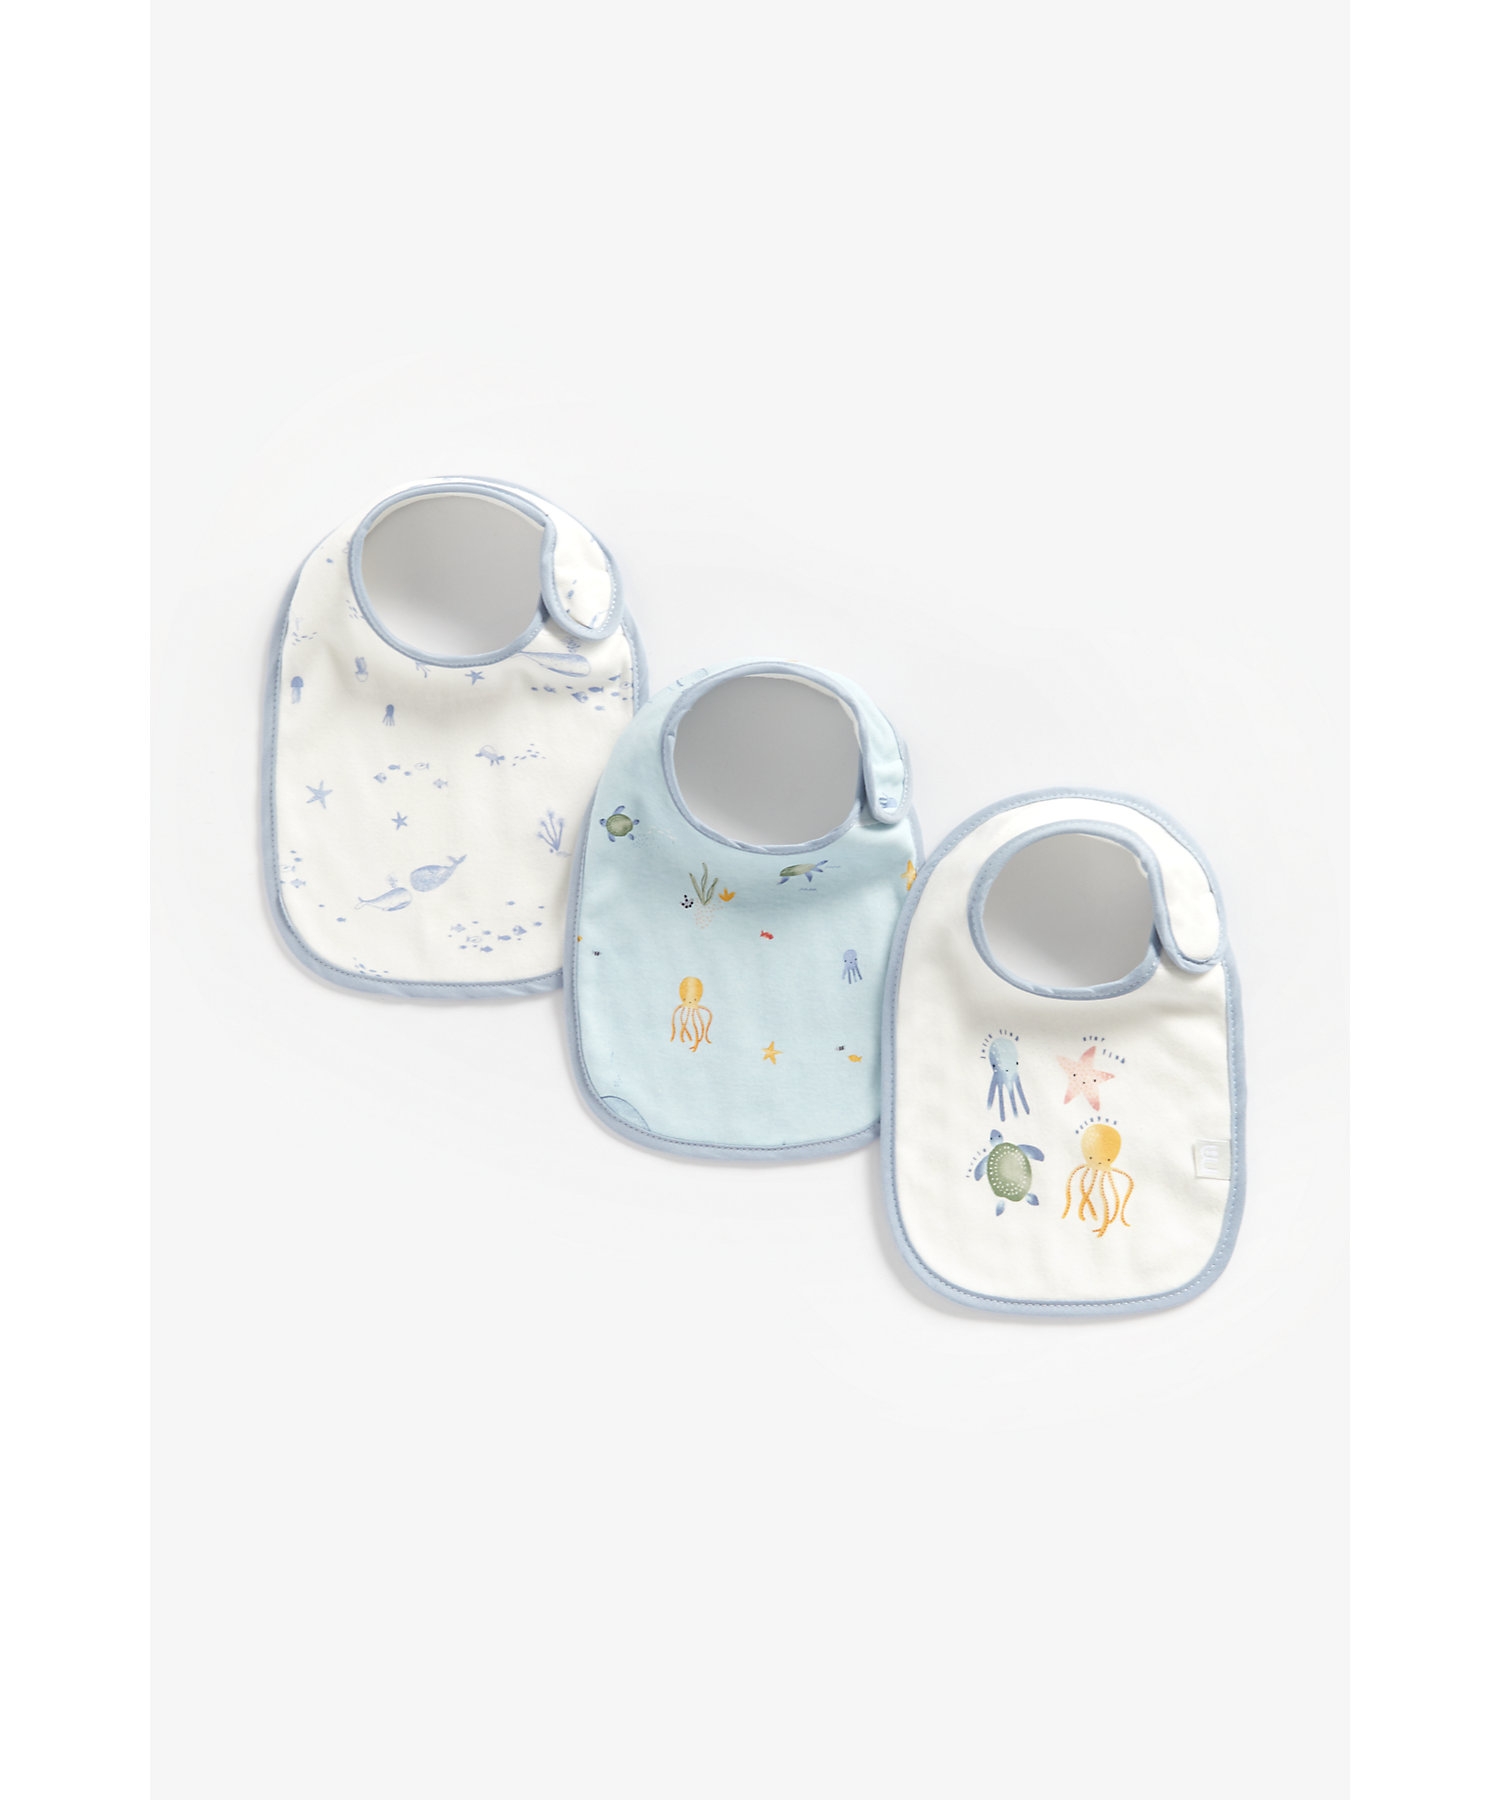 Mothercare You Me & The Sea Bibs Pack of 3 White